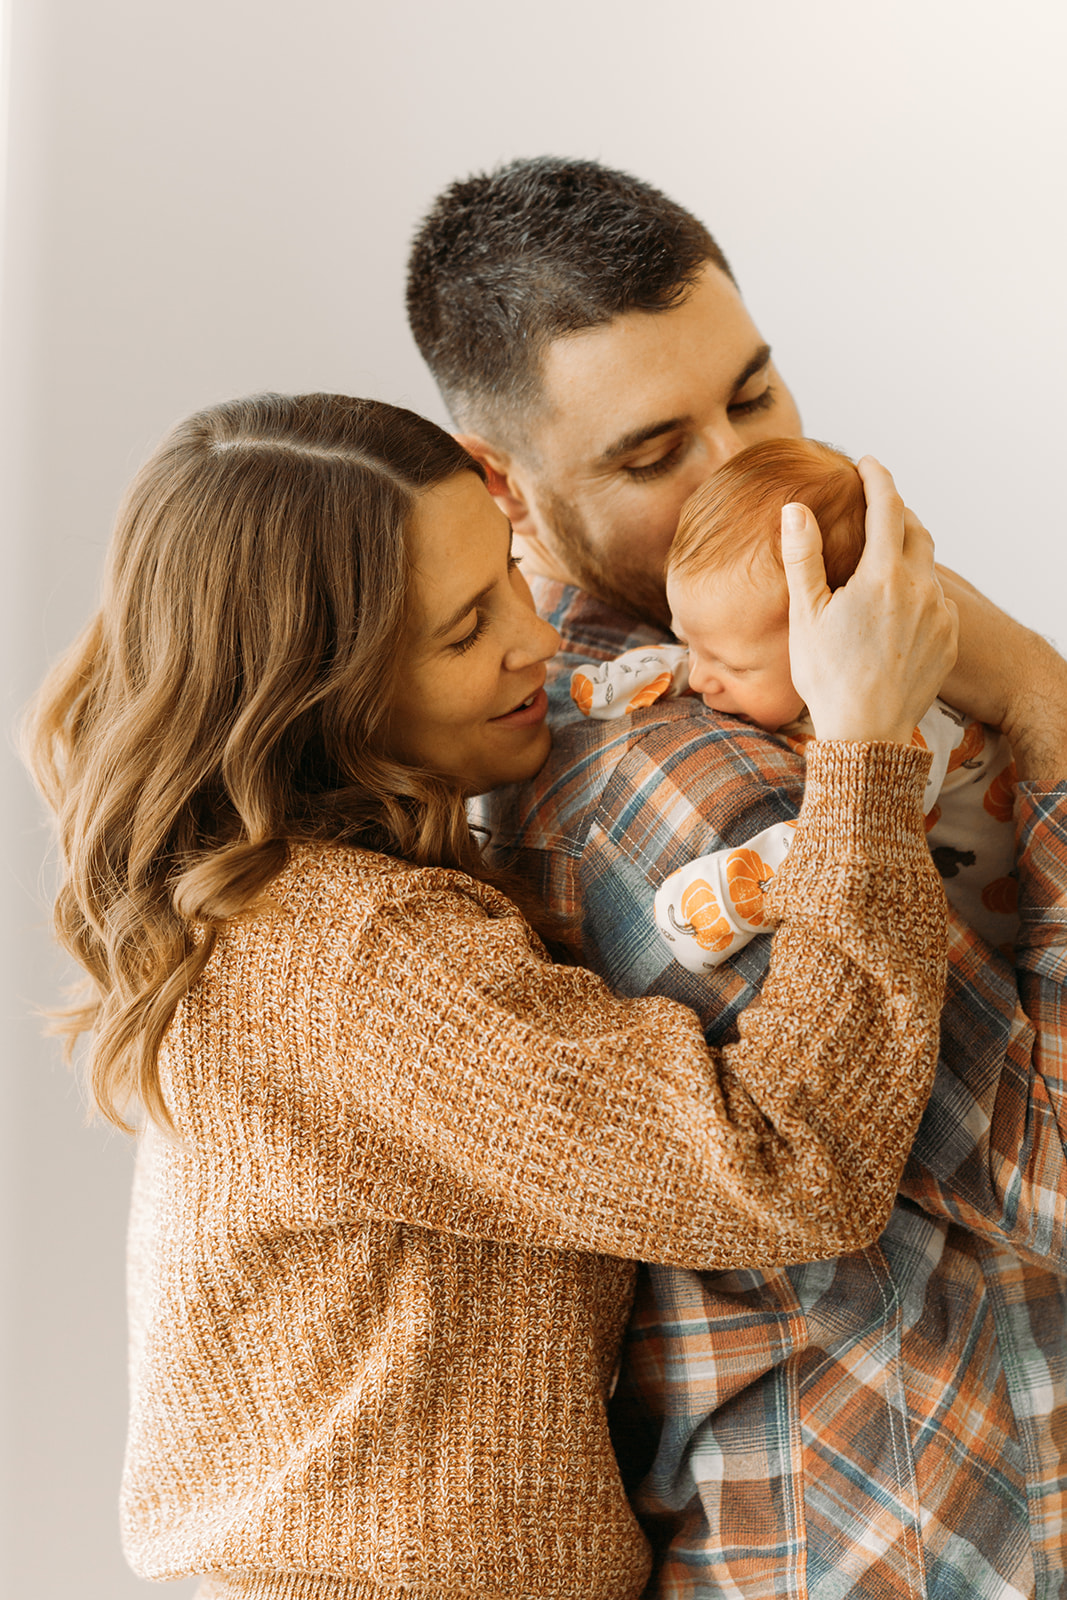 castle pines colorado newborn baby photographer with natural light in home | Halloween and Christmas